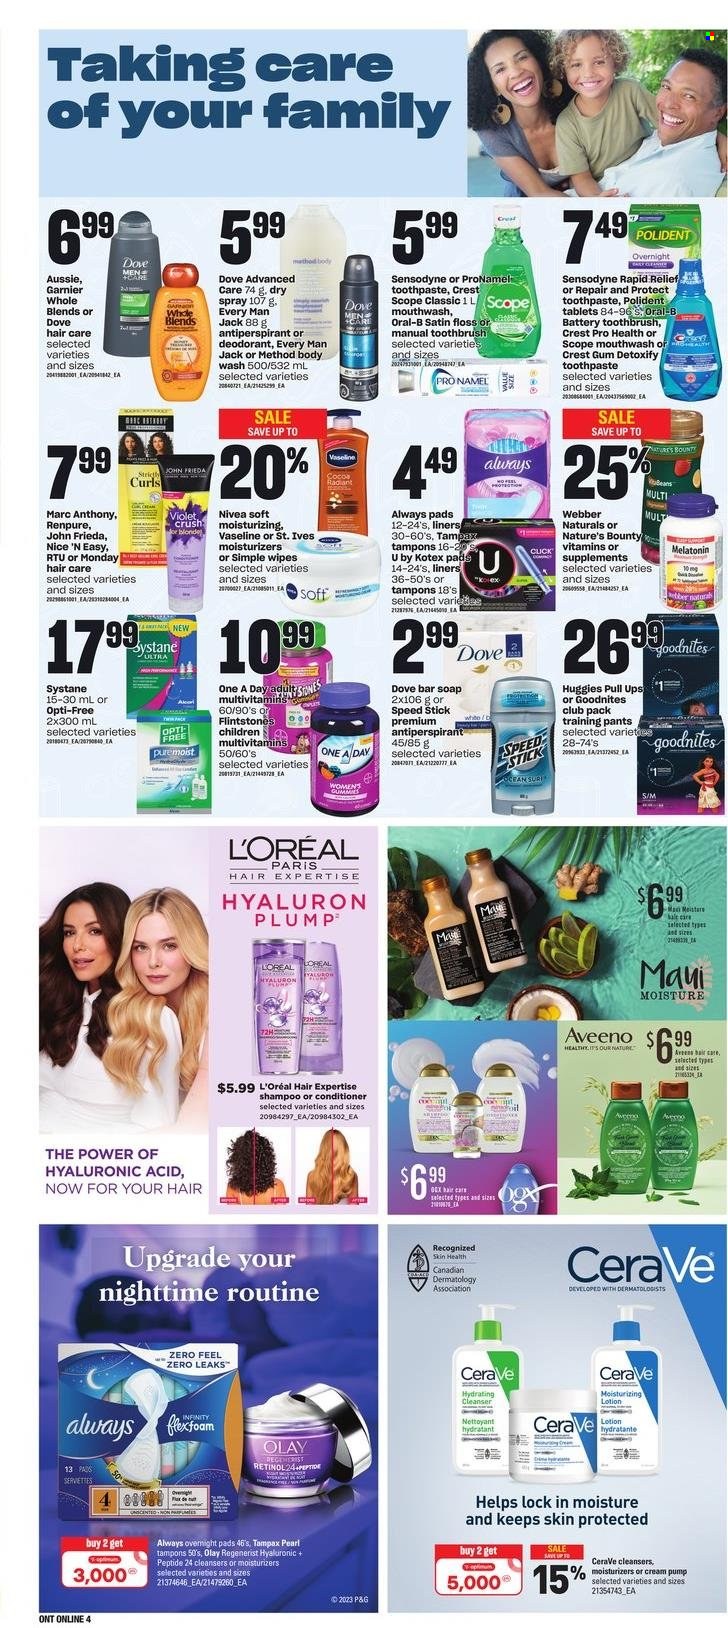 thumbnail - Zehrs Flyer - March 16, 2023 - March 22, 2023 - Sales products - Dove, wipes, pants, baby pants, Aveeno, Nivea, body wash, Vaseline, soap bar, soap, toothbrush, toothpaste, mouthwash, Polident, Crest, Always pads, sanitary pads, Kotex, Kotex pads, tampons, CeraVe, cleanser, L’Oréal, moisturizer, Olay, Infinity, Aussie, conditioner, John Frieda, Maui Moisture, body lotion, anti-perspirant, Speed Stick, serviettes, Optimum, pump, Melatonin, multivitamin, Nature's Bounty, Garnier, shampoo, Systane, Tampax, Huggies, Oral-B, Sensodyne, deodorant. Page 7.